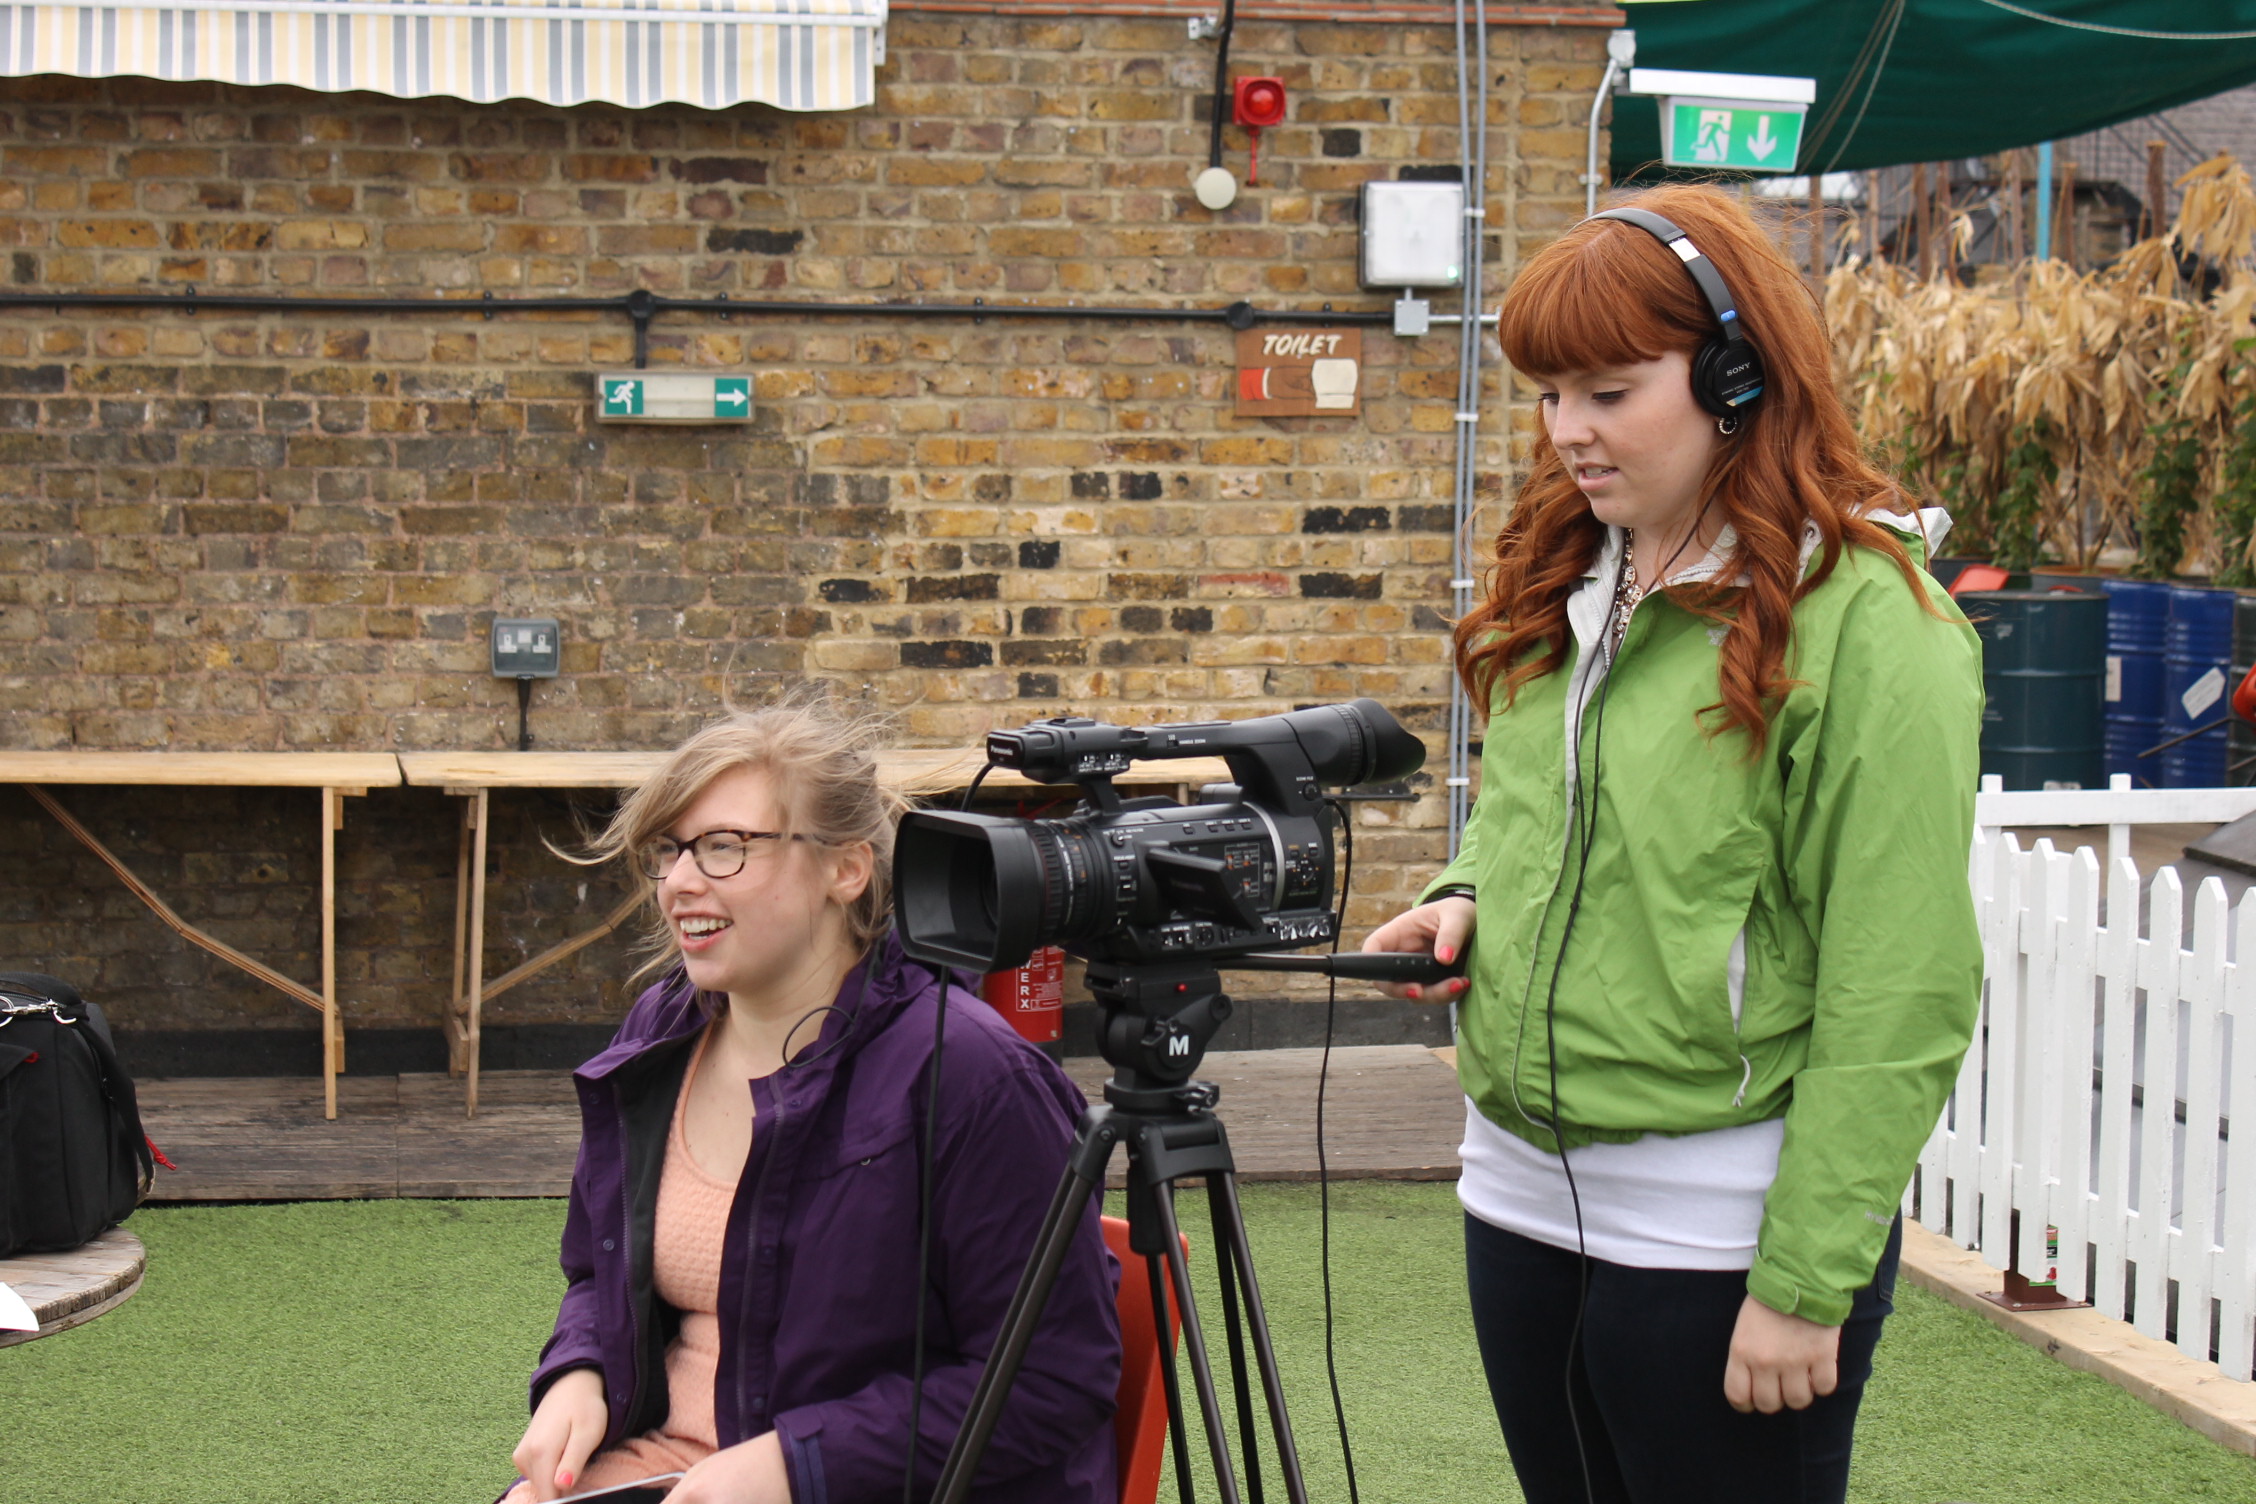 MediaLab member Olivia Ash, left, conducts an interview in London while Taylor Lunka operates the camera. (Photo courtesy of MediaLab)